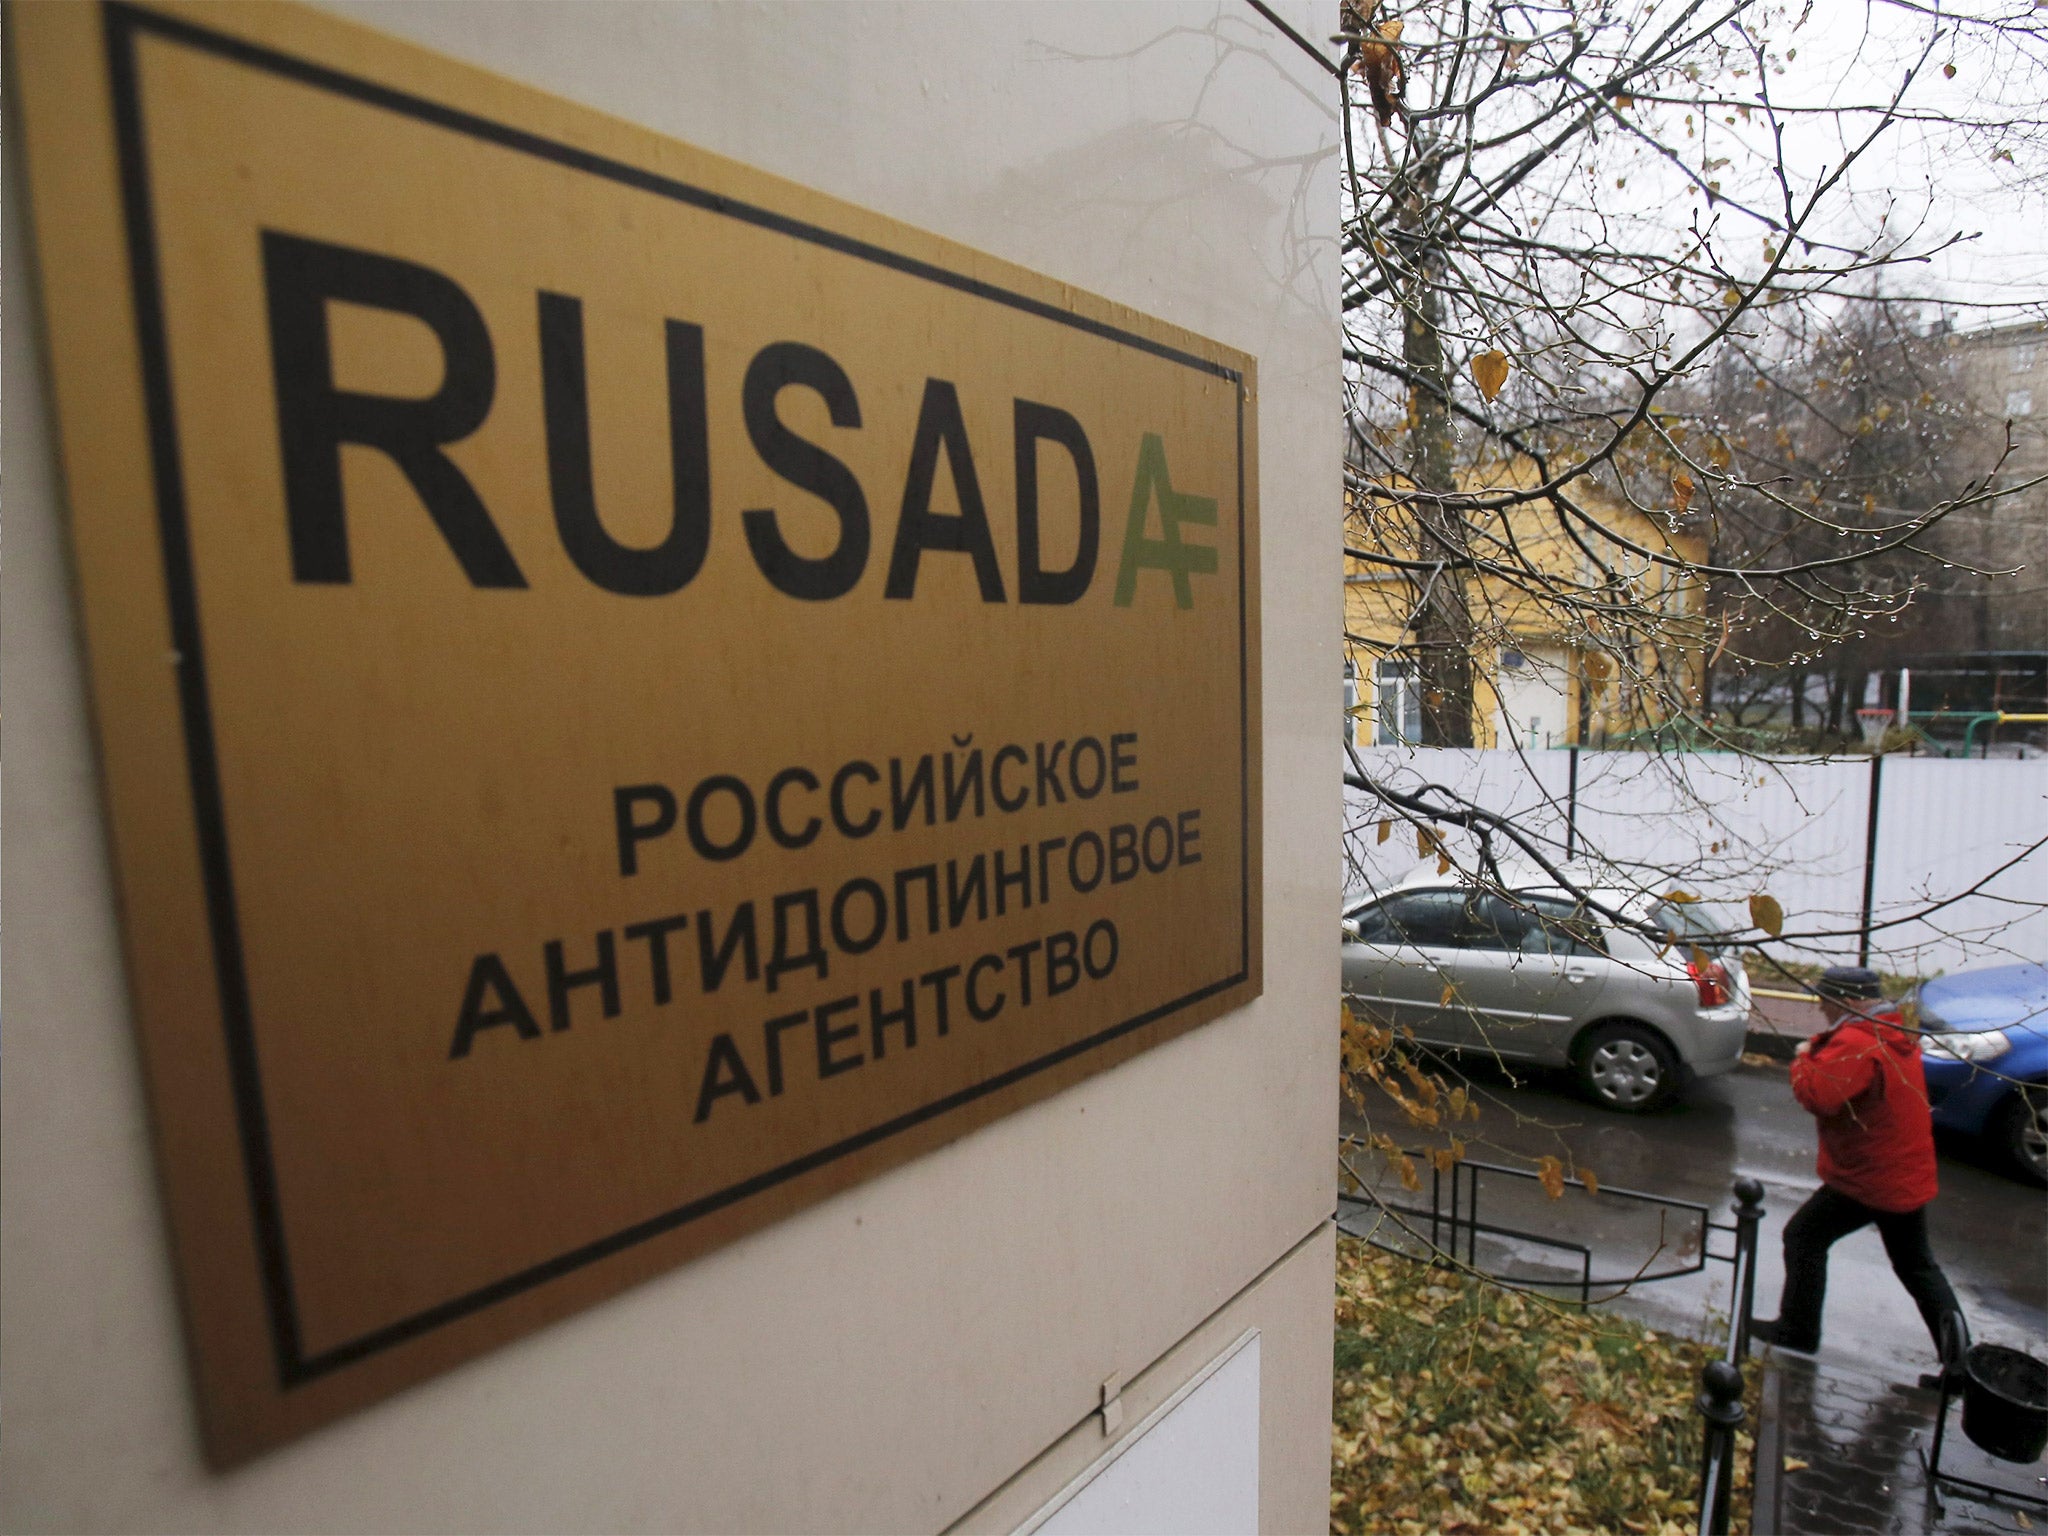 The Russian anti-doping agency (Rusada) has been suspended for non-compliance